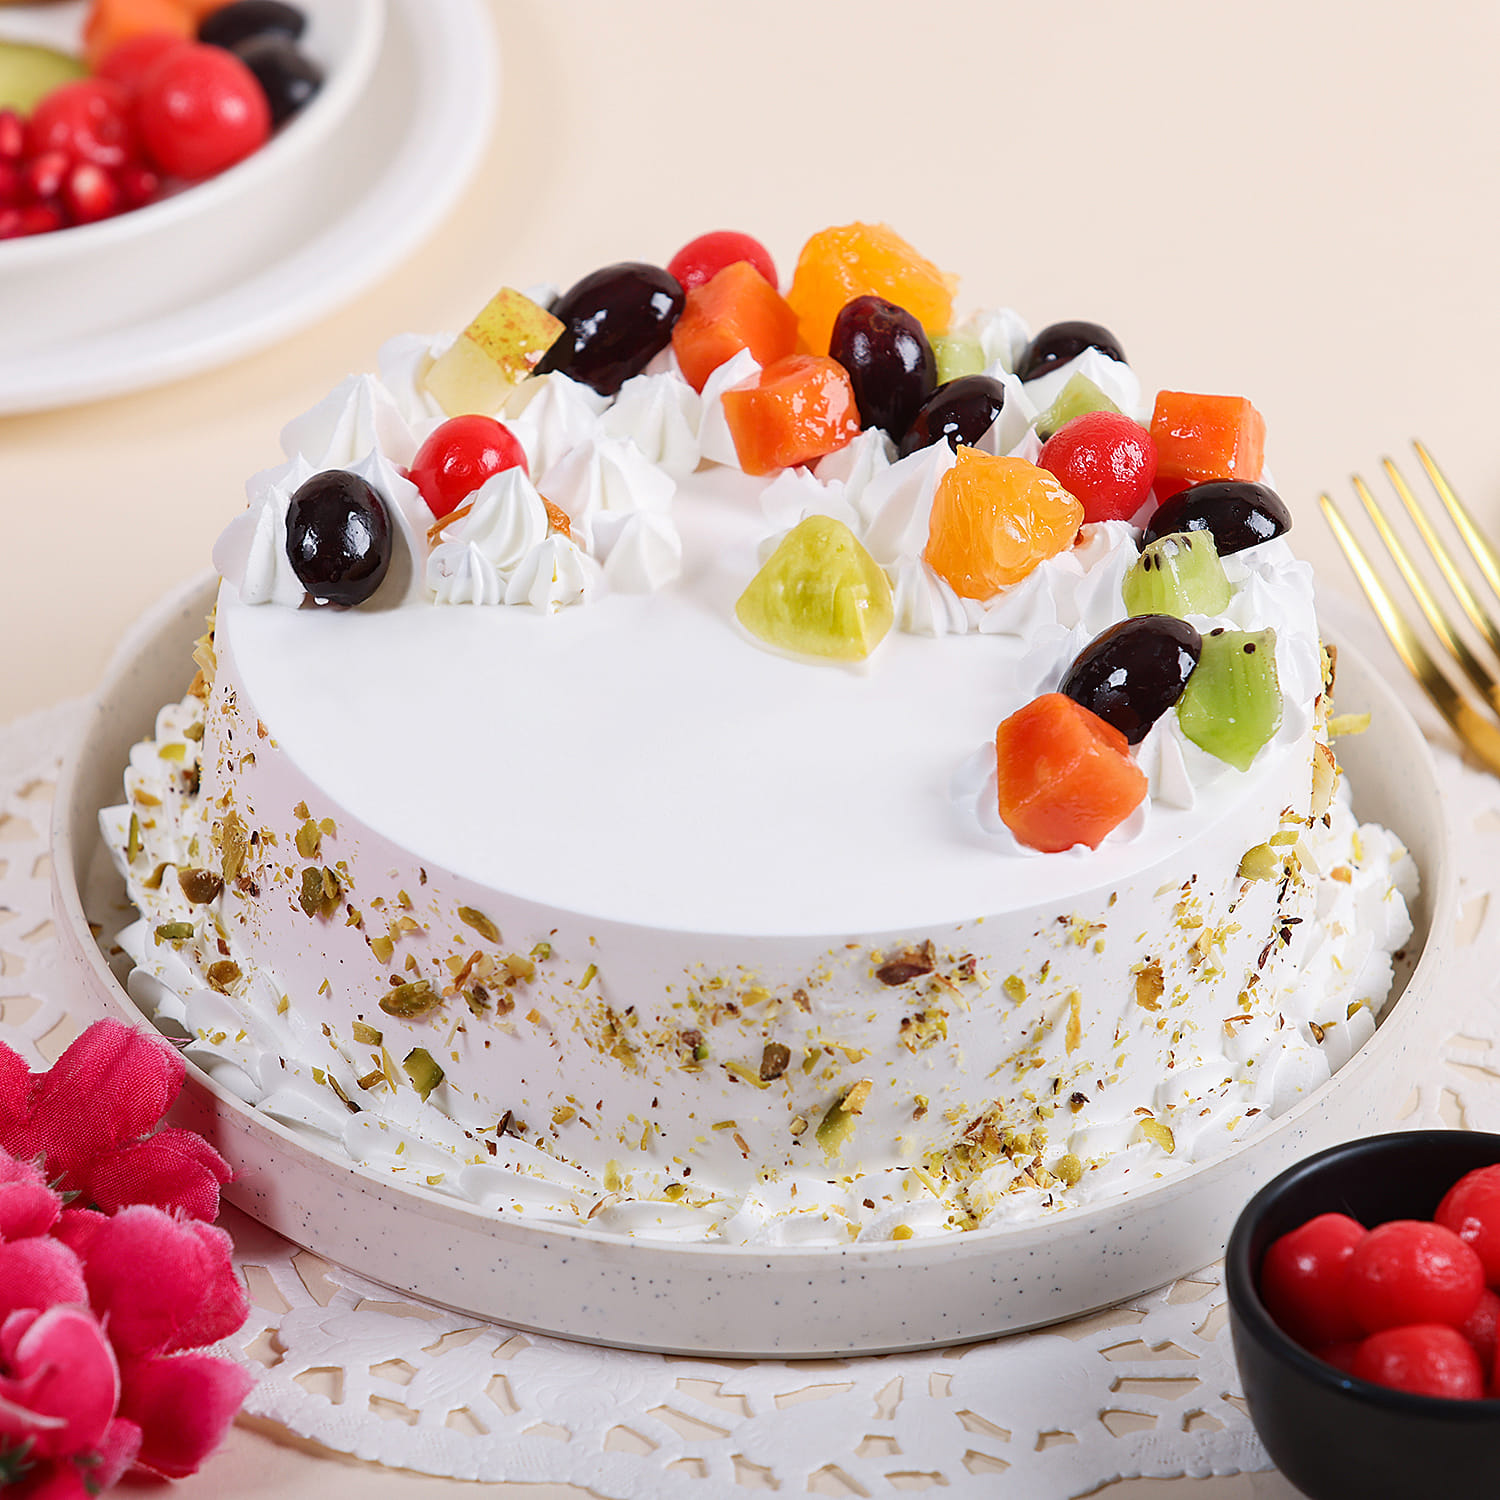 Amazon.co.jp: CAKE EXPRESS Allergy-free, Eggless Birthday Flower Cake with  Message, 3 Types of Fruit Fresh Cream, No. 4 : Food, Beverages & Alcohol